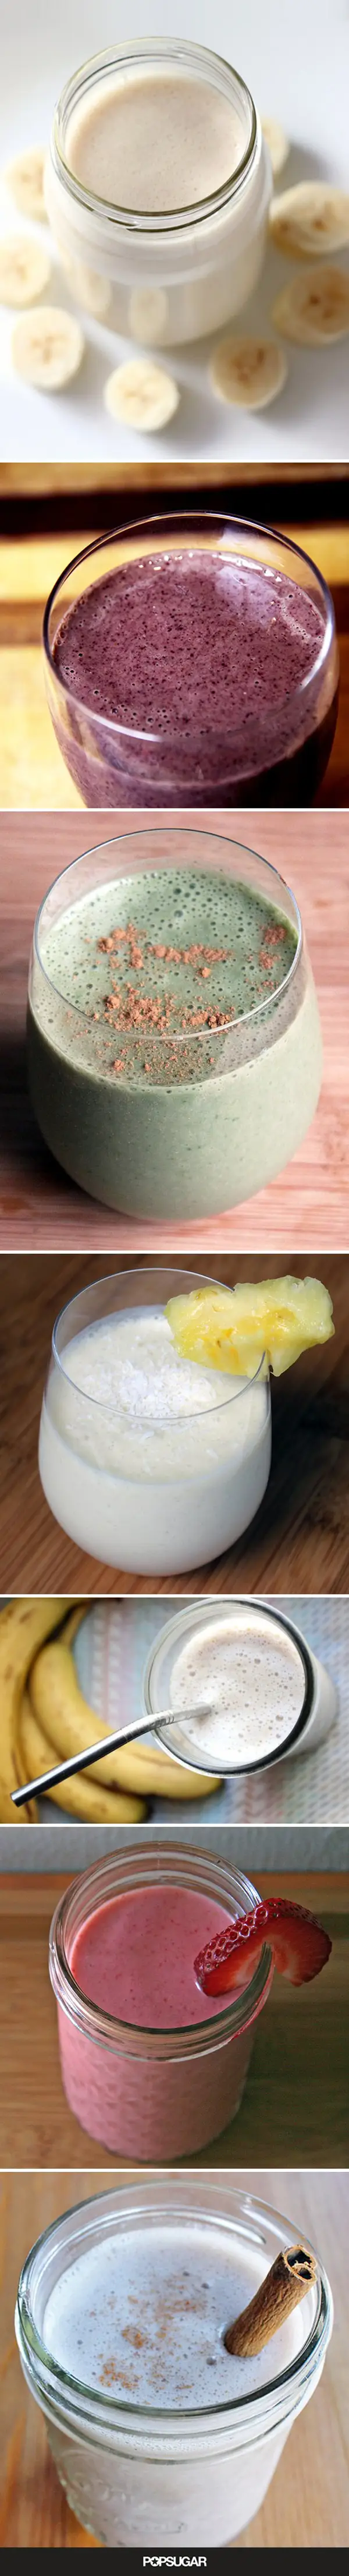 Tips for Making Healthy Smoothies